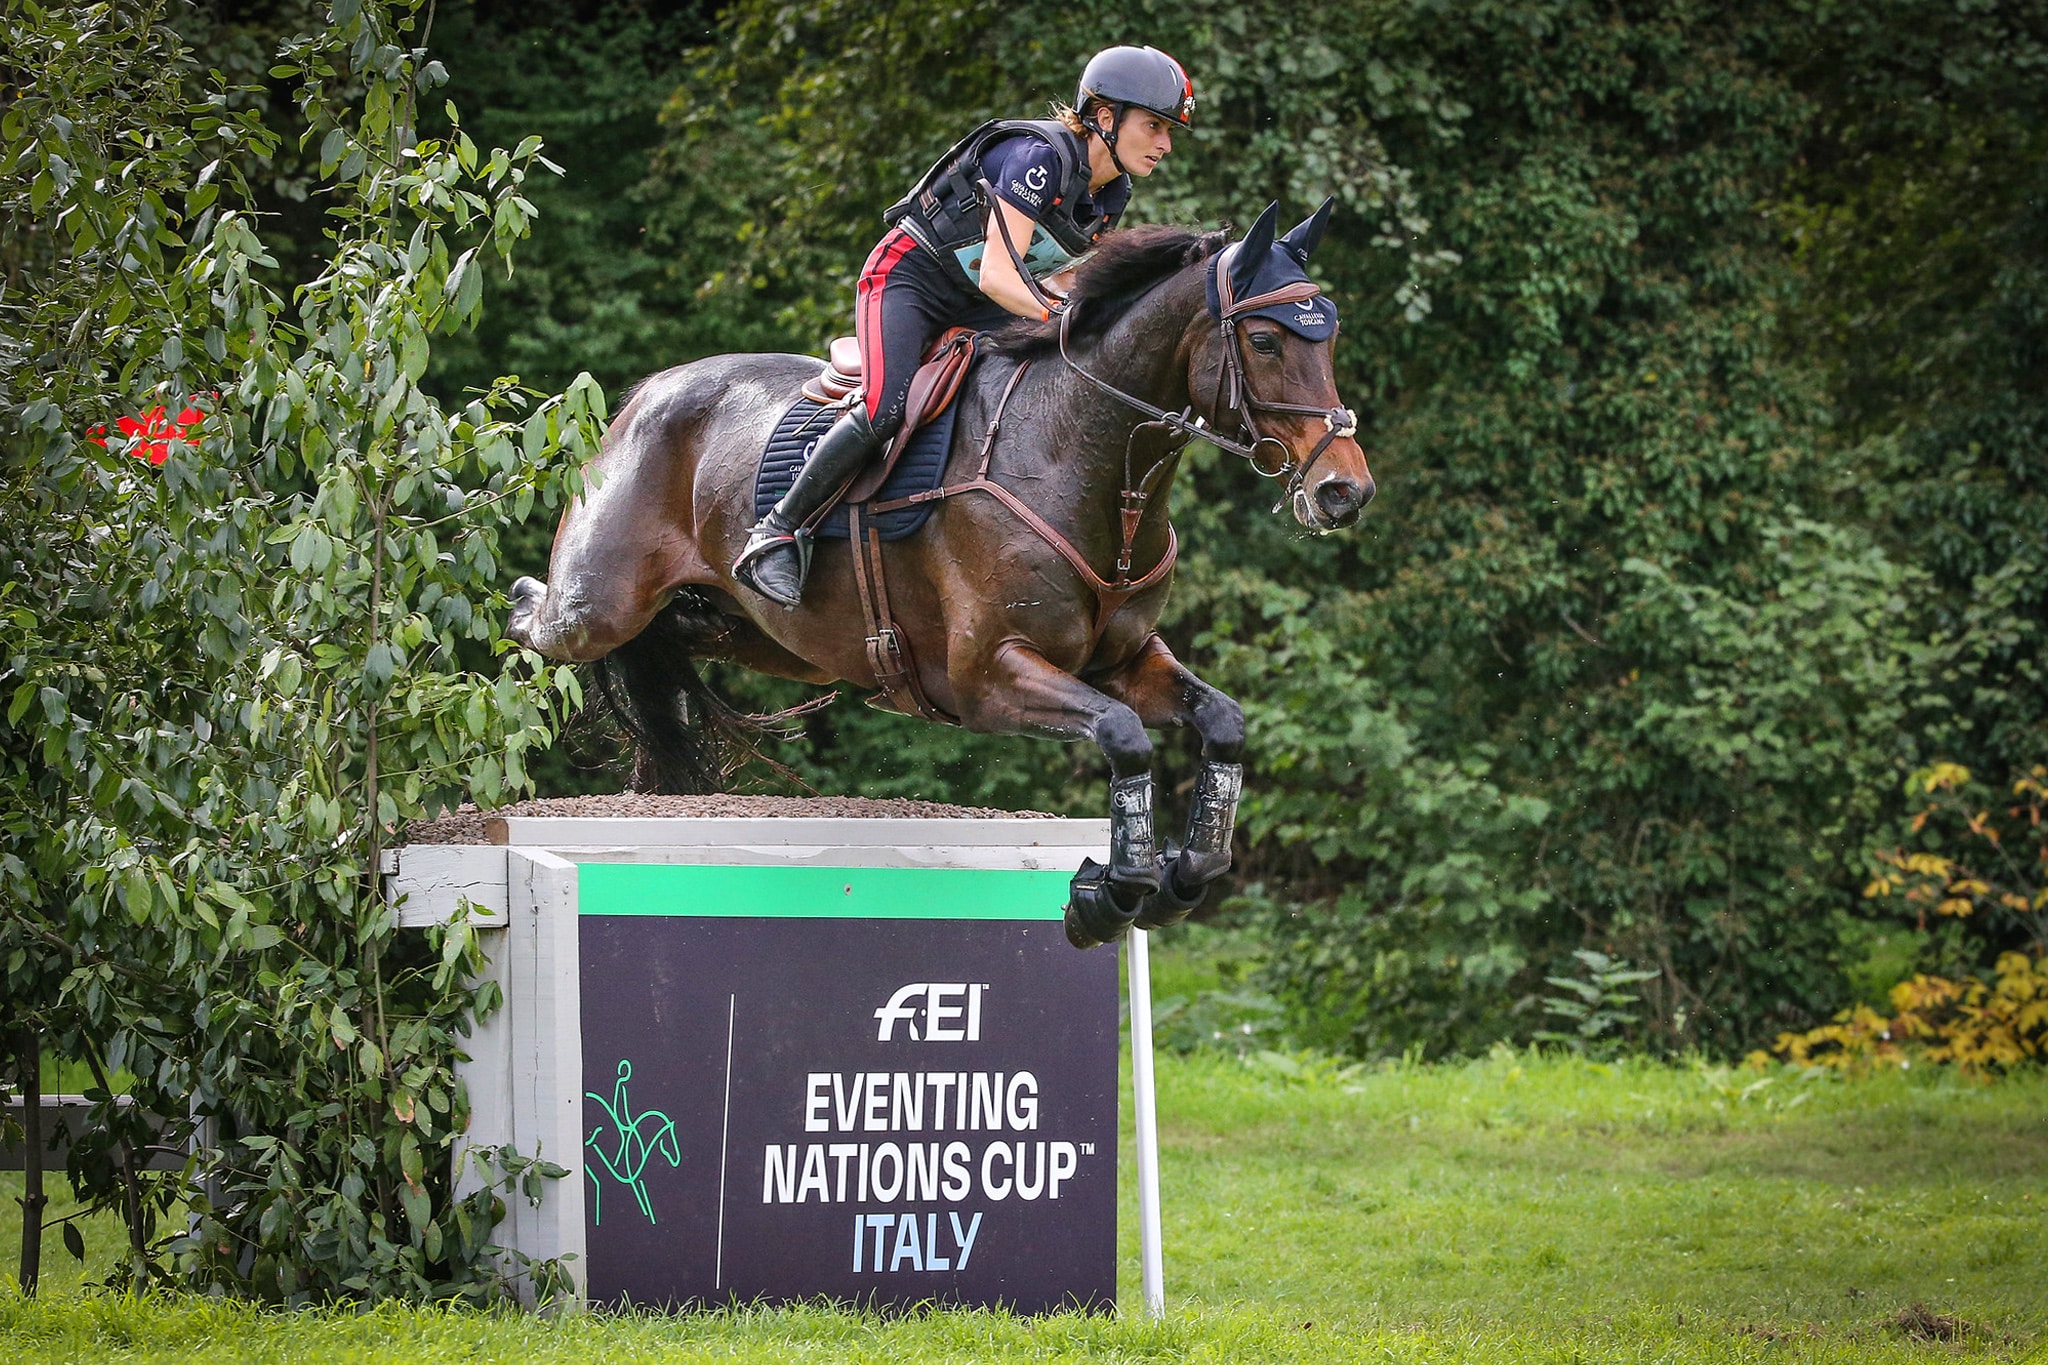 Italy’s Arianna Schivo riding Quefira de L'Ormeau at the 2020 FEI Eventing Nations Cup (Image © FEI/Massimo Argenziano)